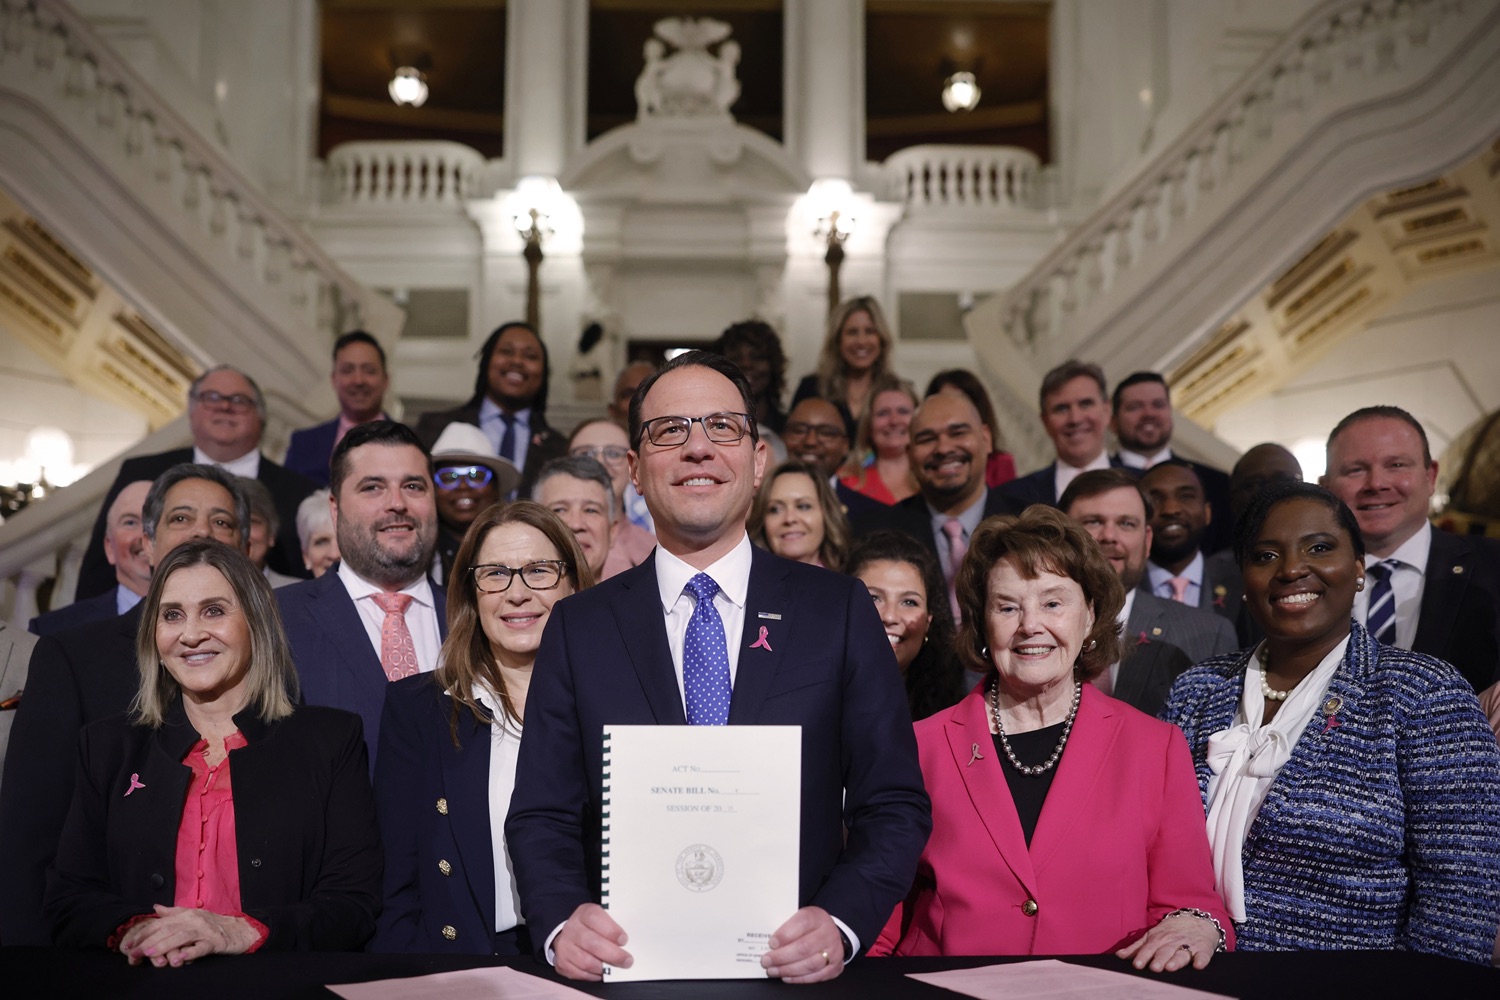 Governor Josh Shapiro signed the first bill of his Administration - Act 1 of 2023, a first-of-its-kind law in the nation that will require insurers to cover preventive breast and ovarian cancer screenings for high-risk women at no cost. MAY 01, 2023 - HARRISBURG, PA<br><a href="https://filesource.amperwave.net/commonwealthofpa/photo/23041_gov_sb8_dz_001.JPG" target="_blank">⇣ Download Photo</a>